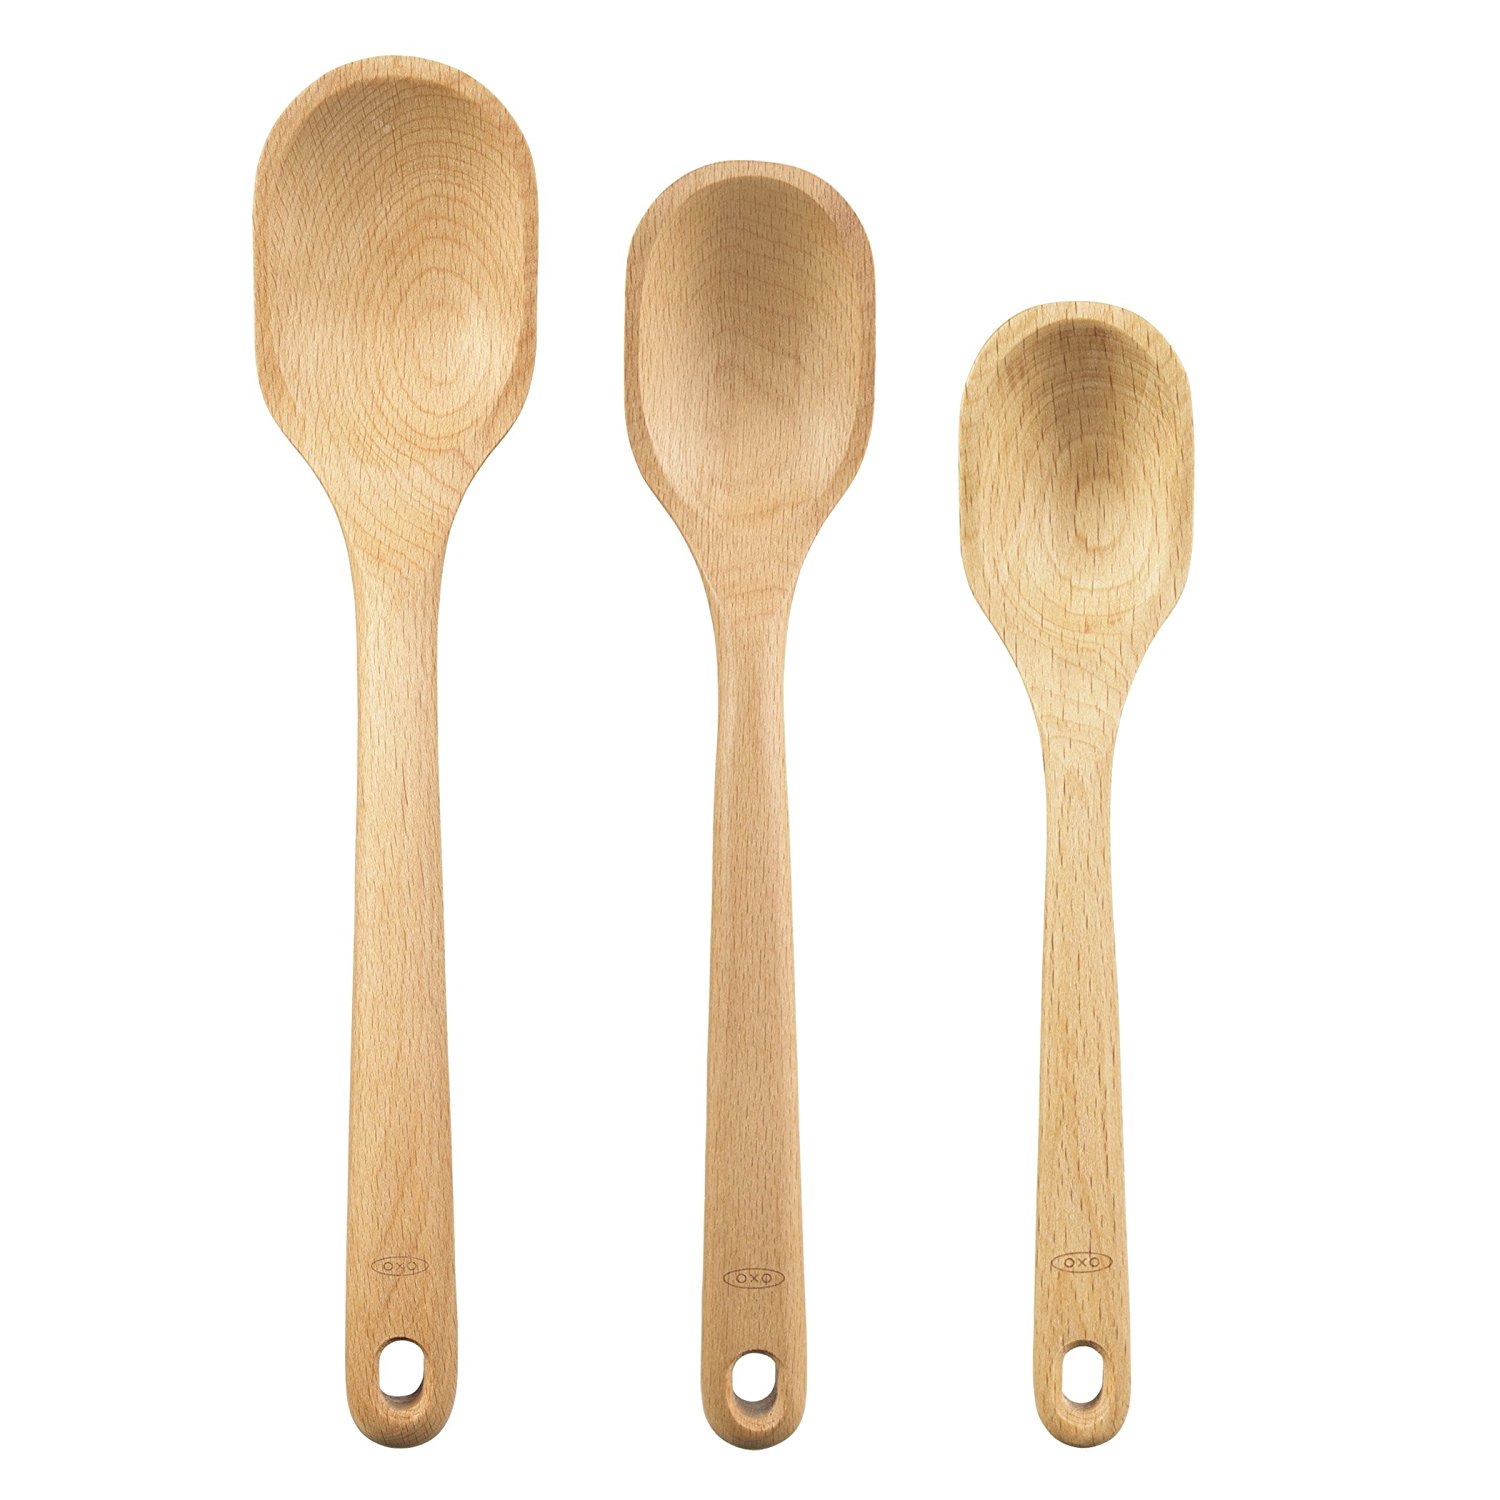 Amazon.com: OXO Good Grips Wooden Spoon Set, 3-Piece: Kitchen & Dining